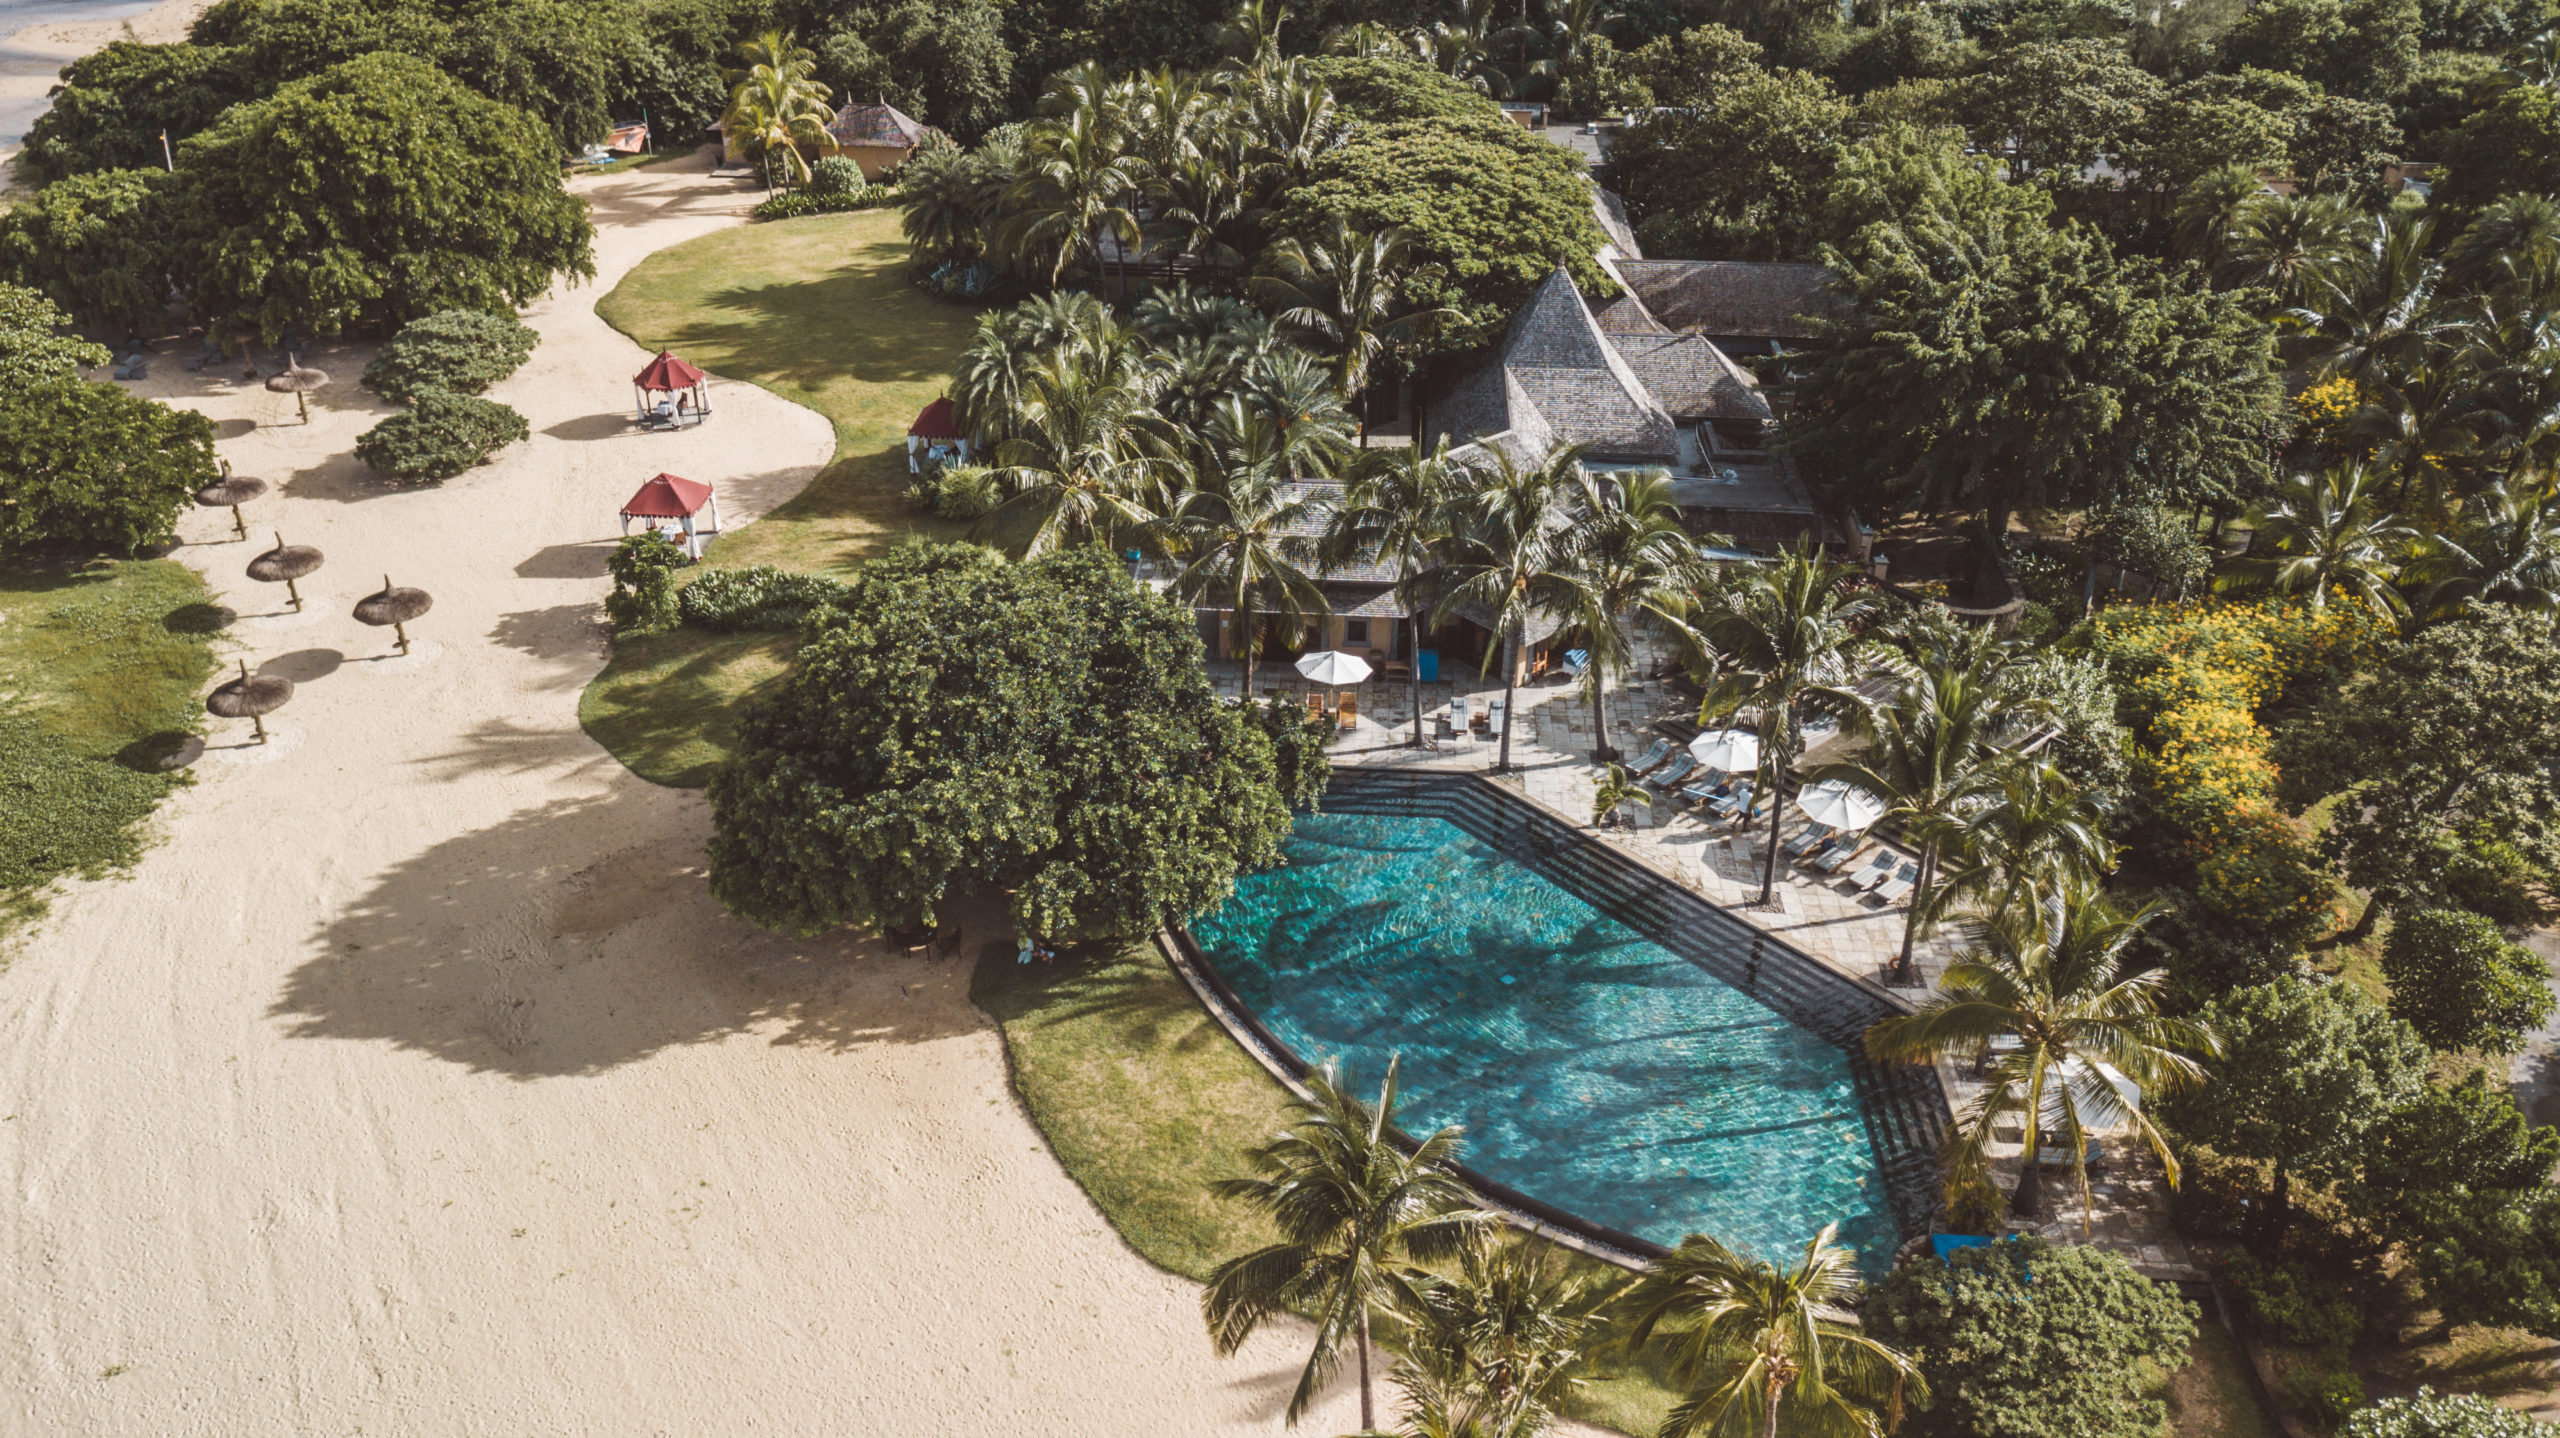 A bird’s eye view 
of the sunkissed Mauritian resort